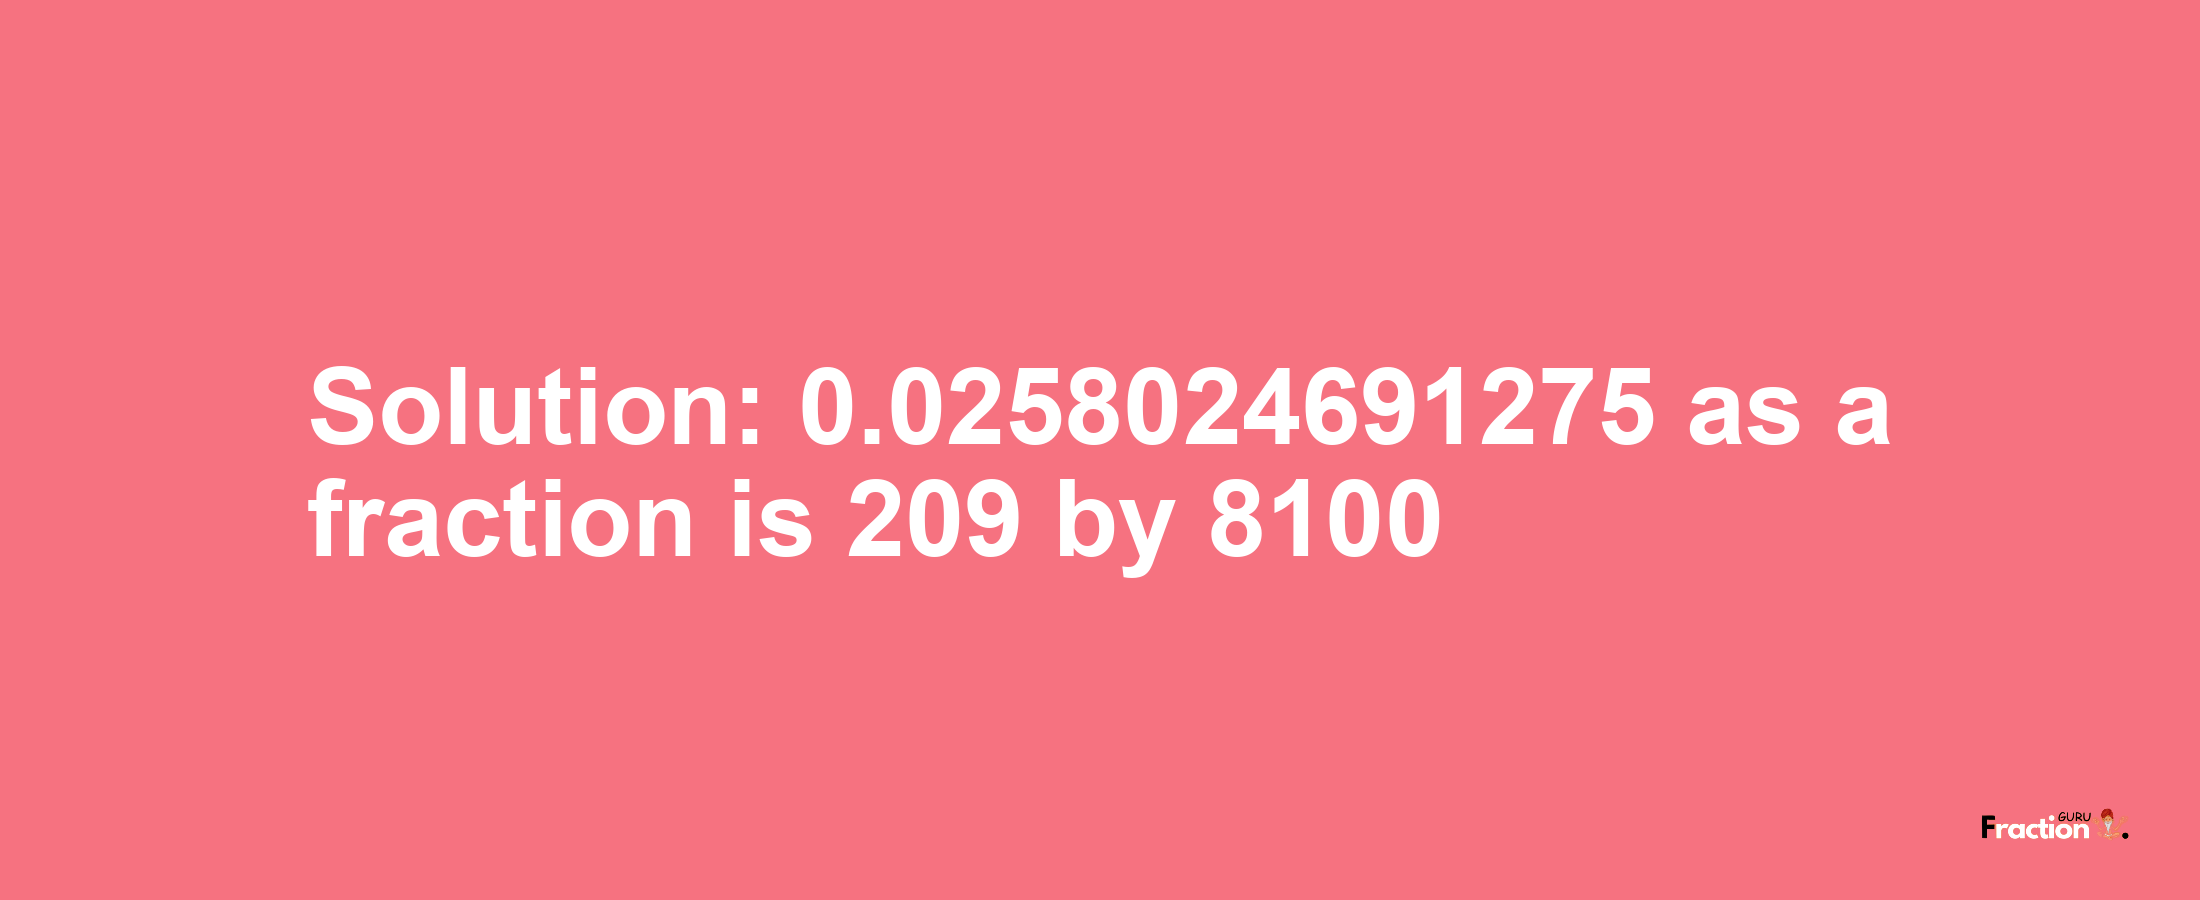 Solution:0.0258024691275 as a fraction is 209/8100